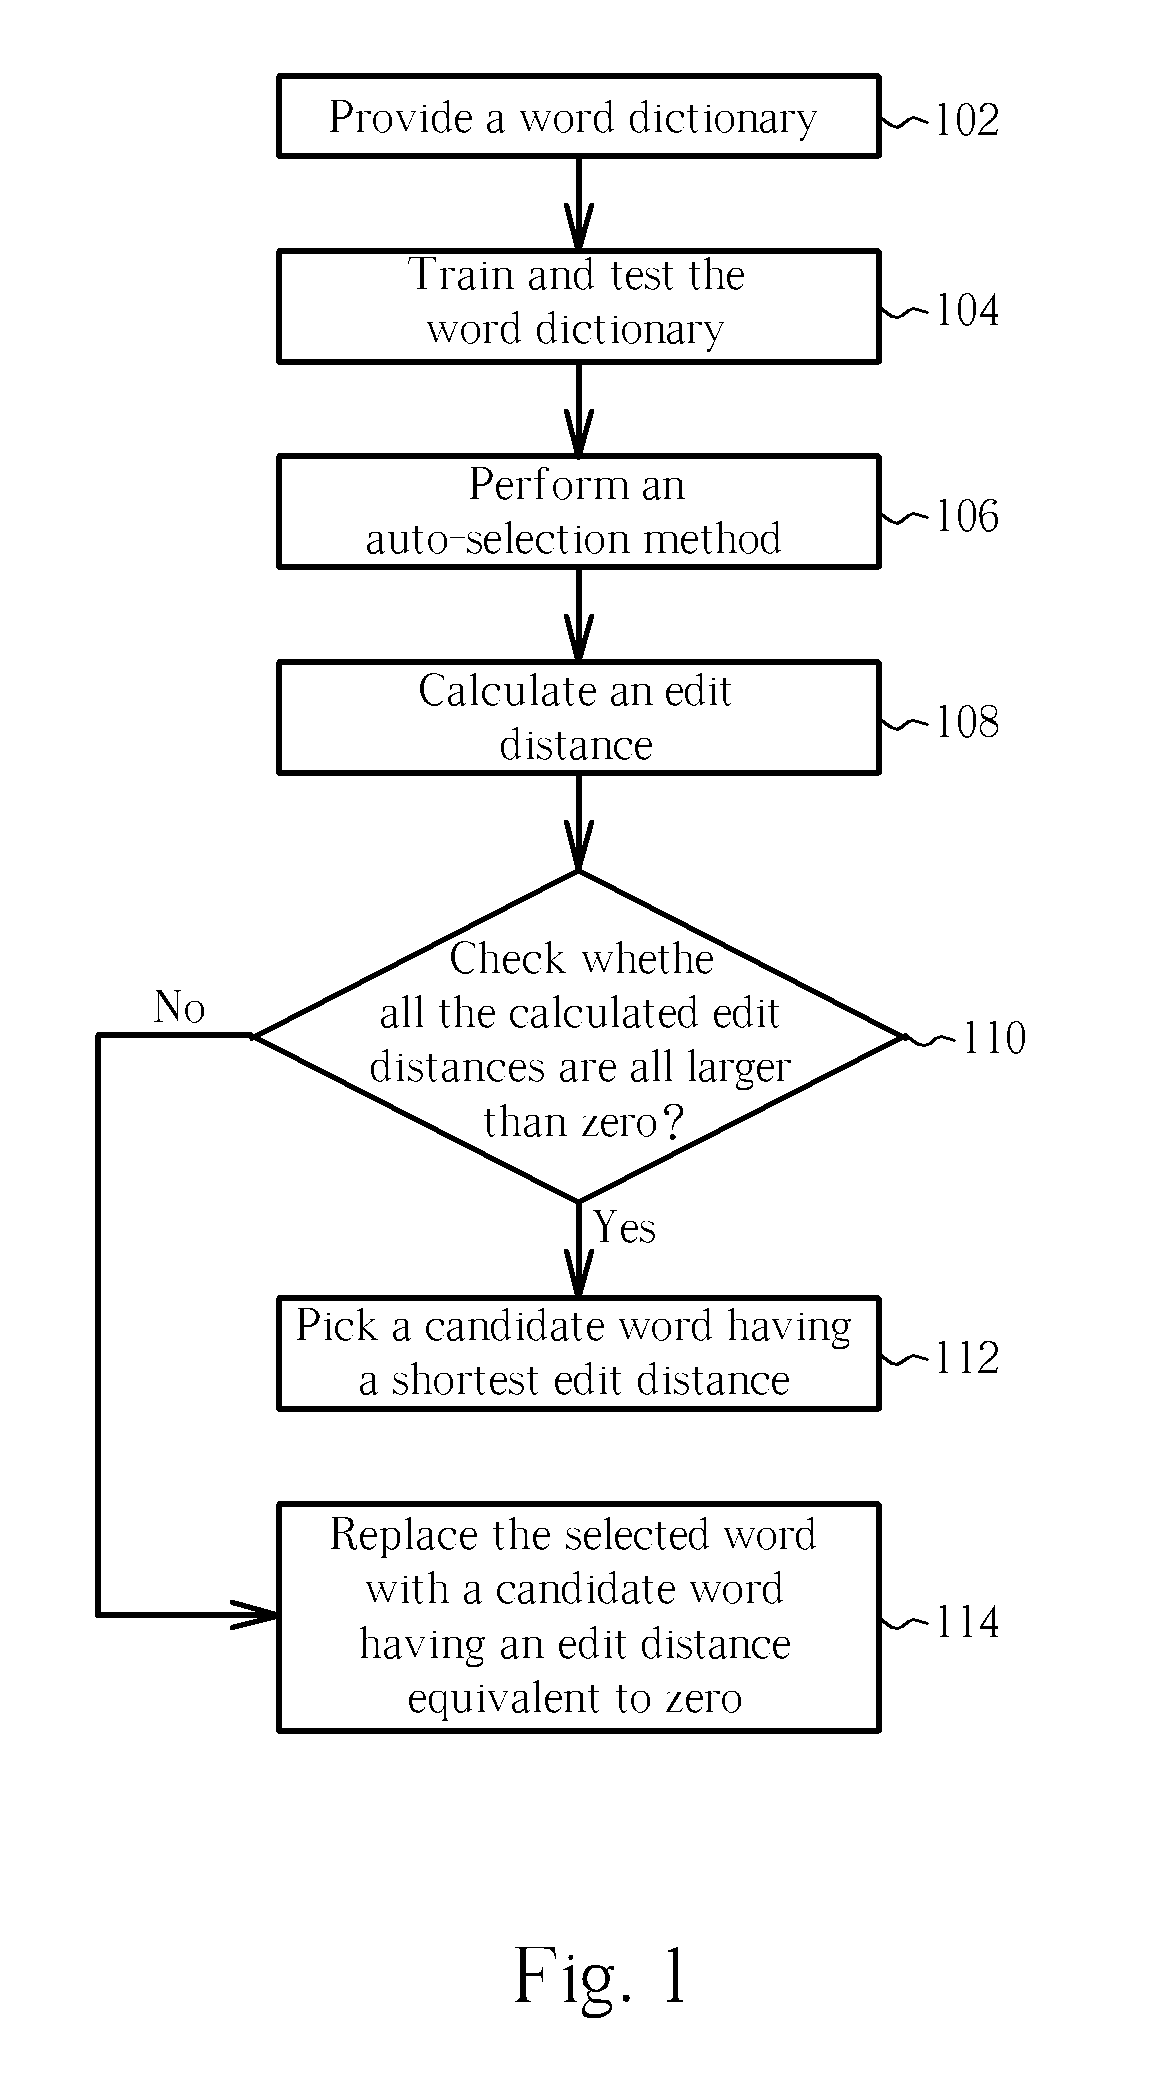 Typing candidate generating method for enhancing typing efficiency